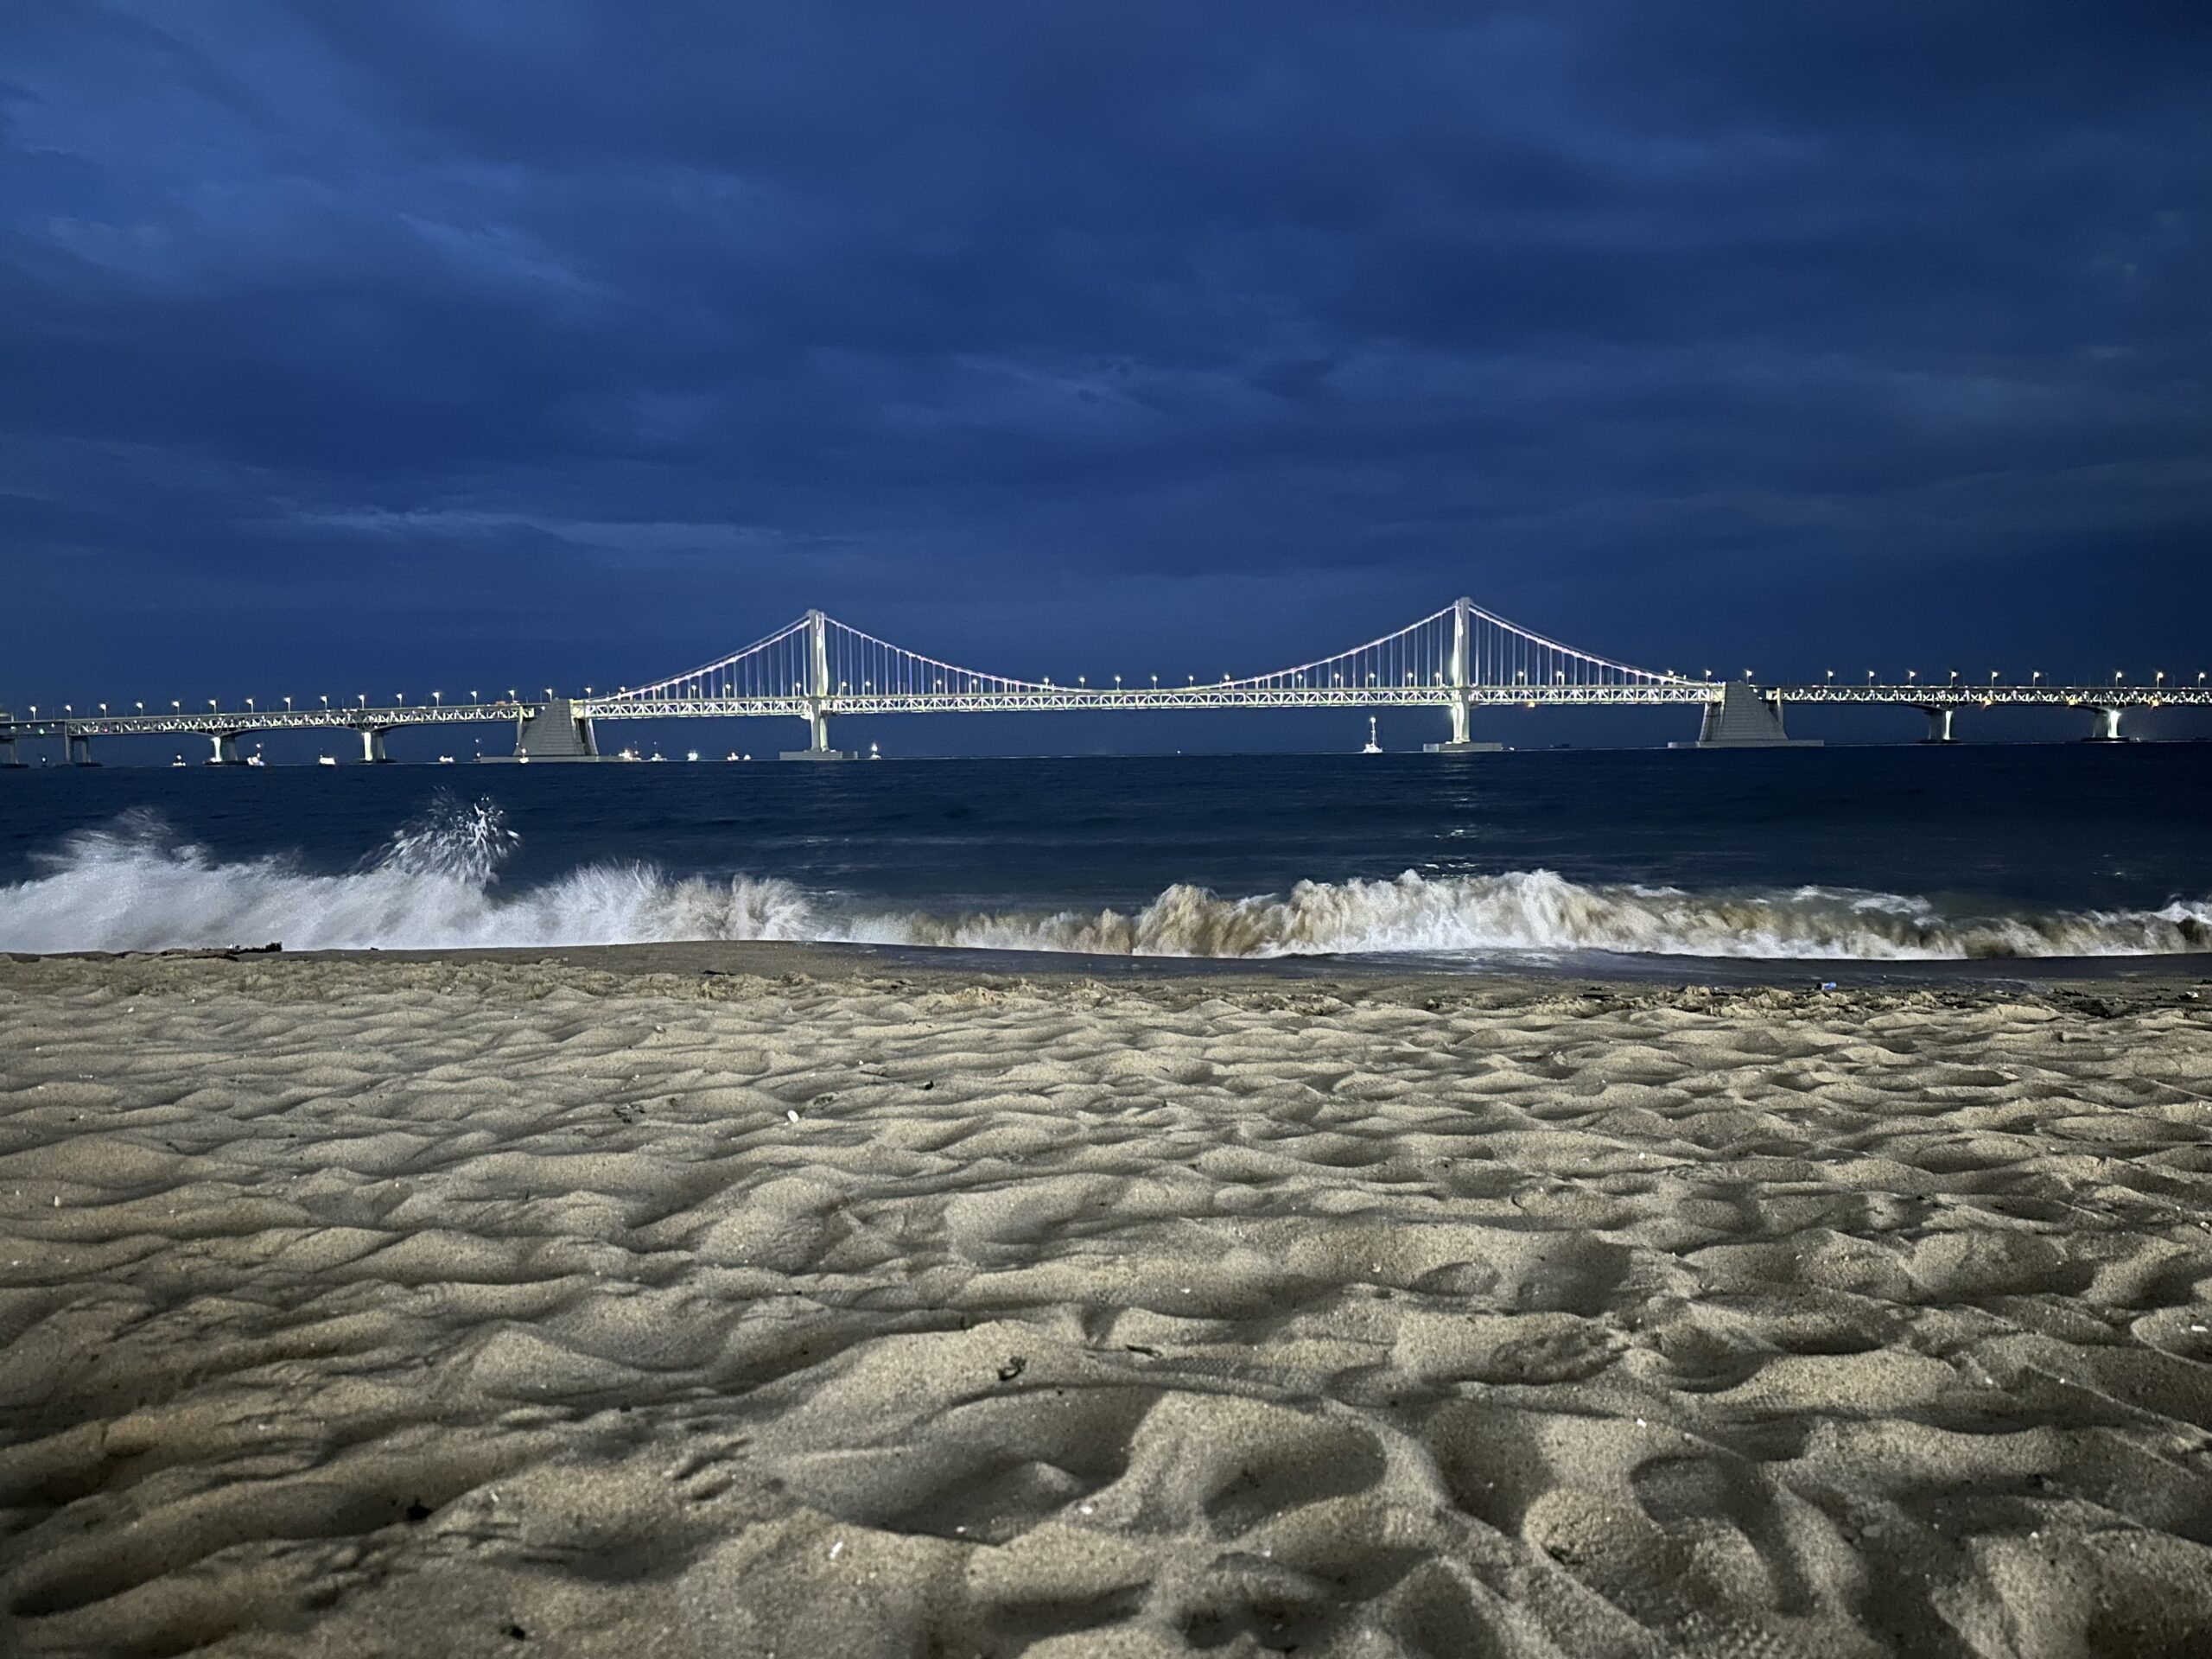 Diamond bridge at Gwangalli beach, usually there is a light show everyday at 8 PM and 10 PM, but this was also under maintenance while I was there.